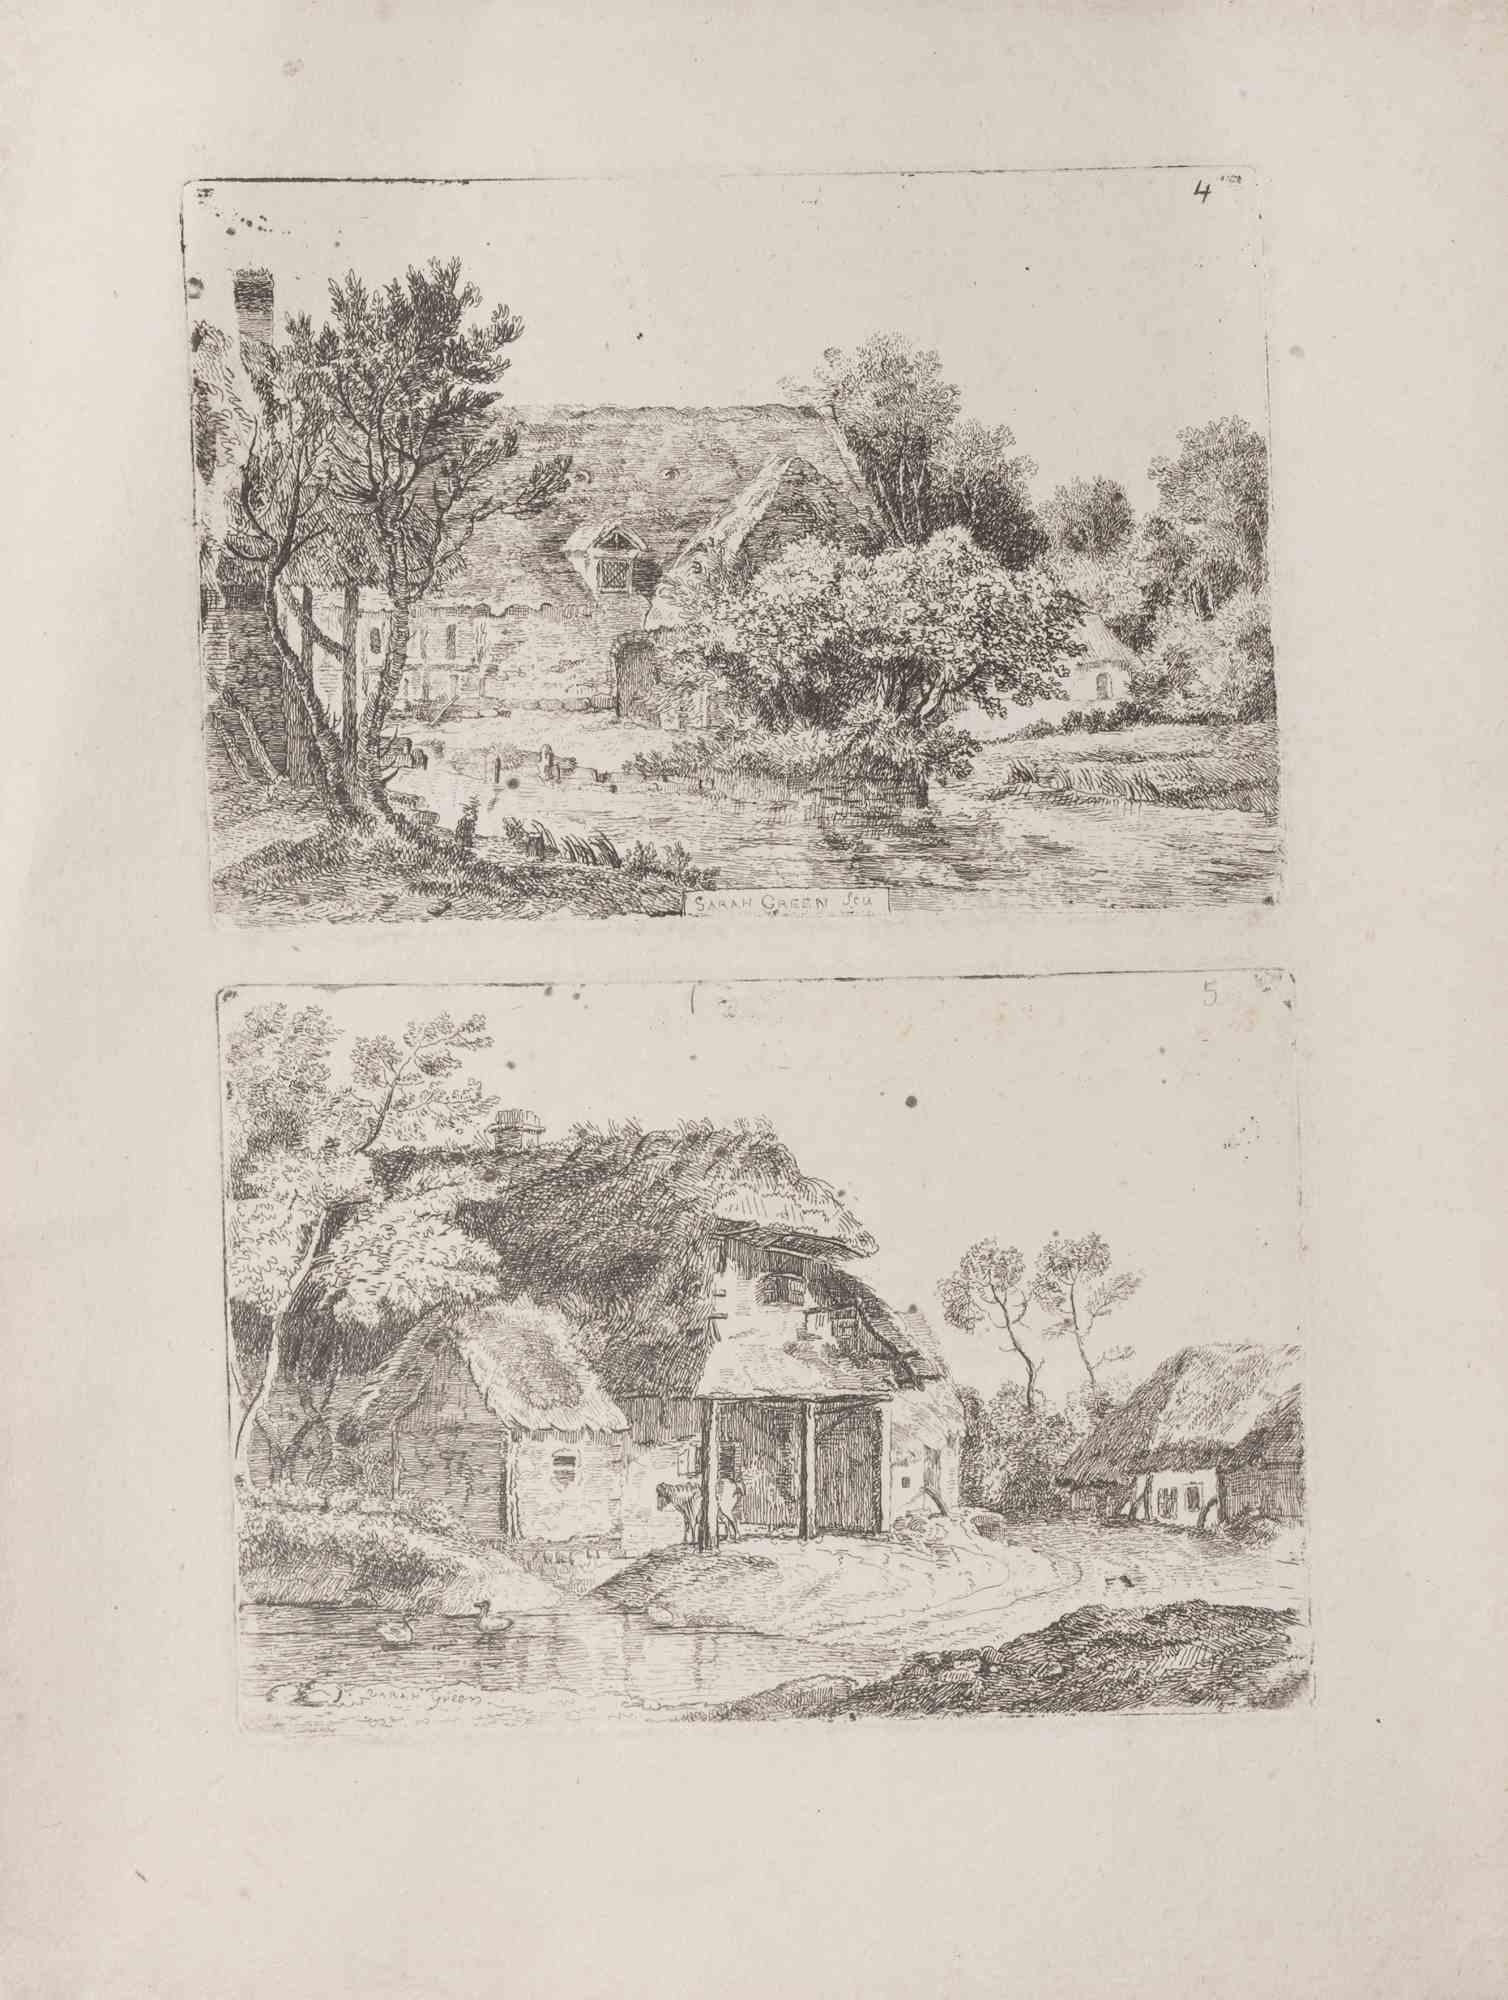 Village - Vintage Lithograph by Sarah Green - Late 19th century